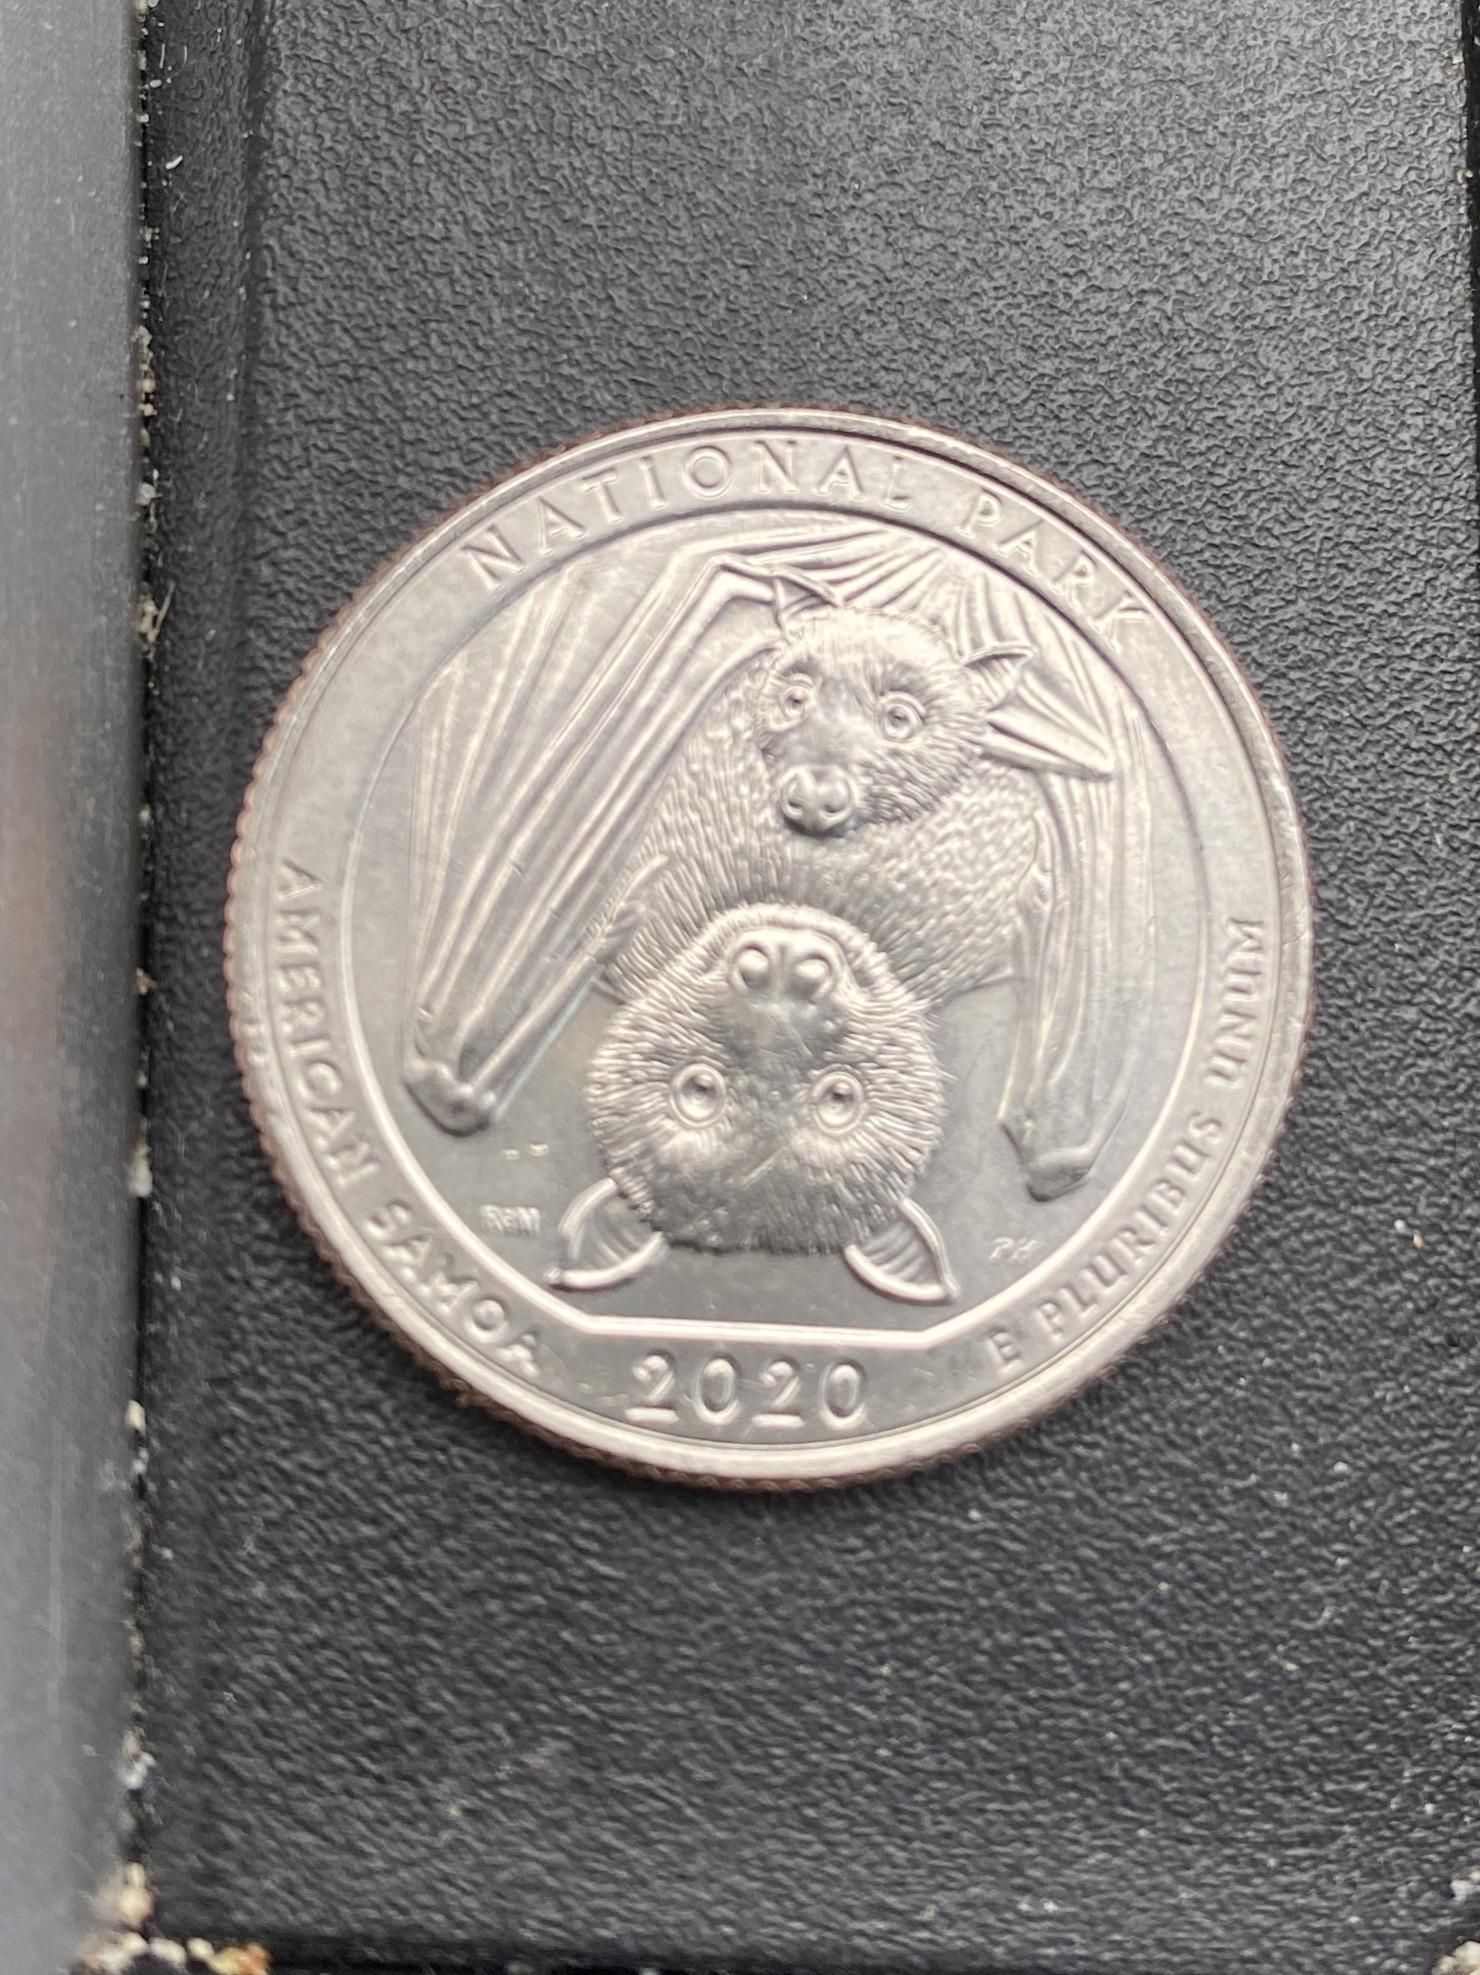 Got a 2020 quarter and it’s a freaking bat. Nothing says 2020 like a bat, I suppose.